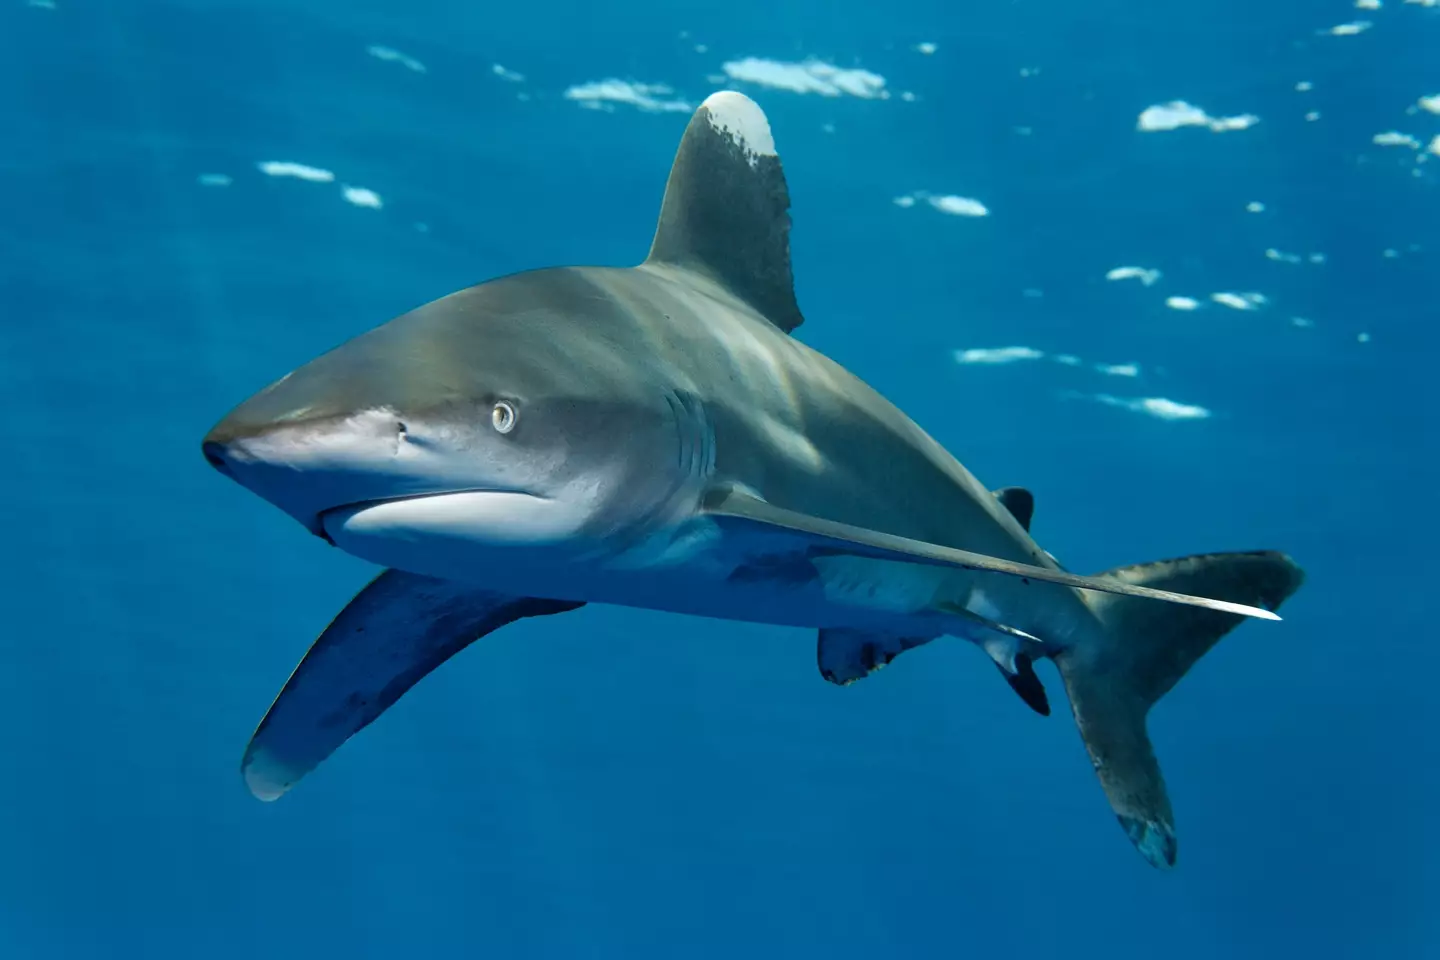 The Oceanic Whitetip is thought to be the type of shark which took most of the 150 victims.